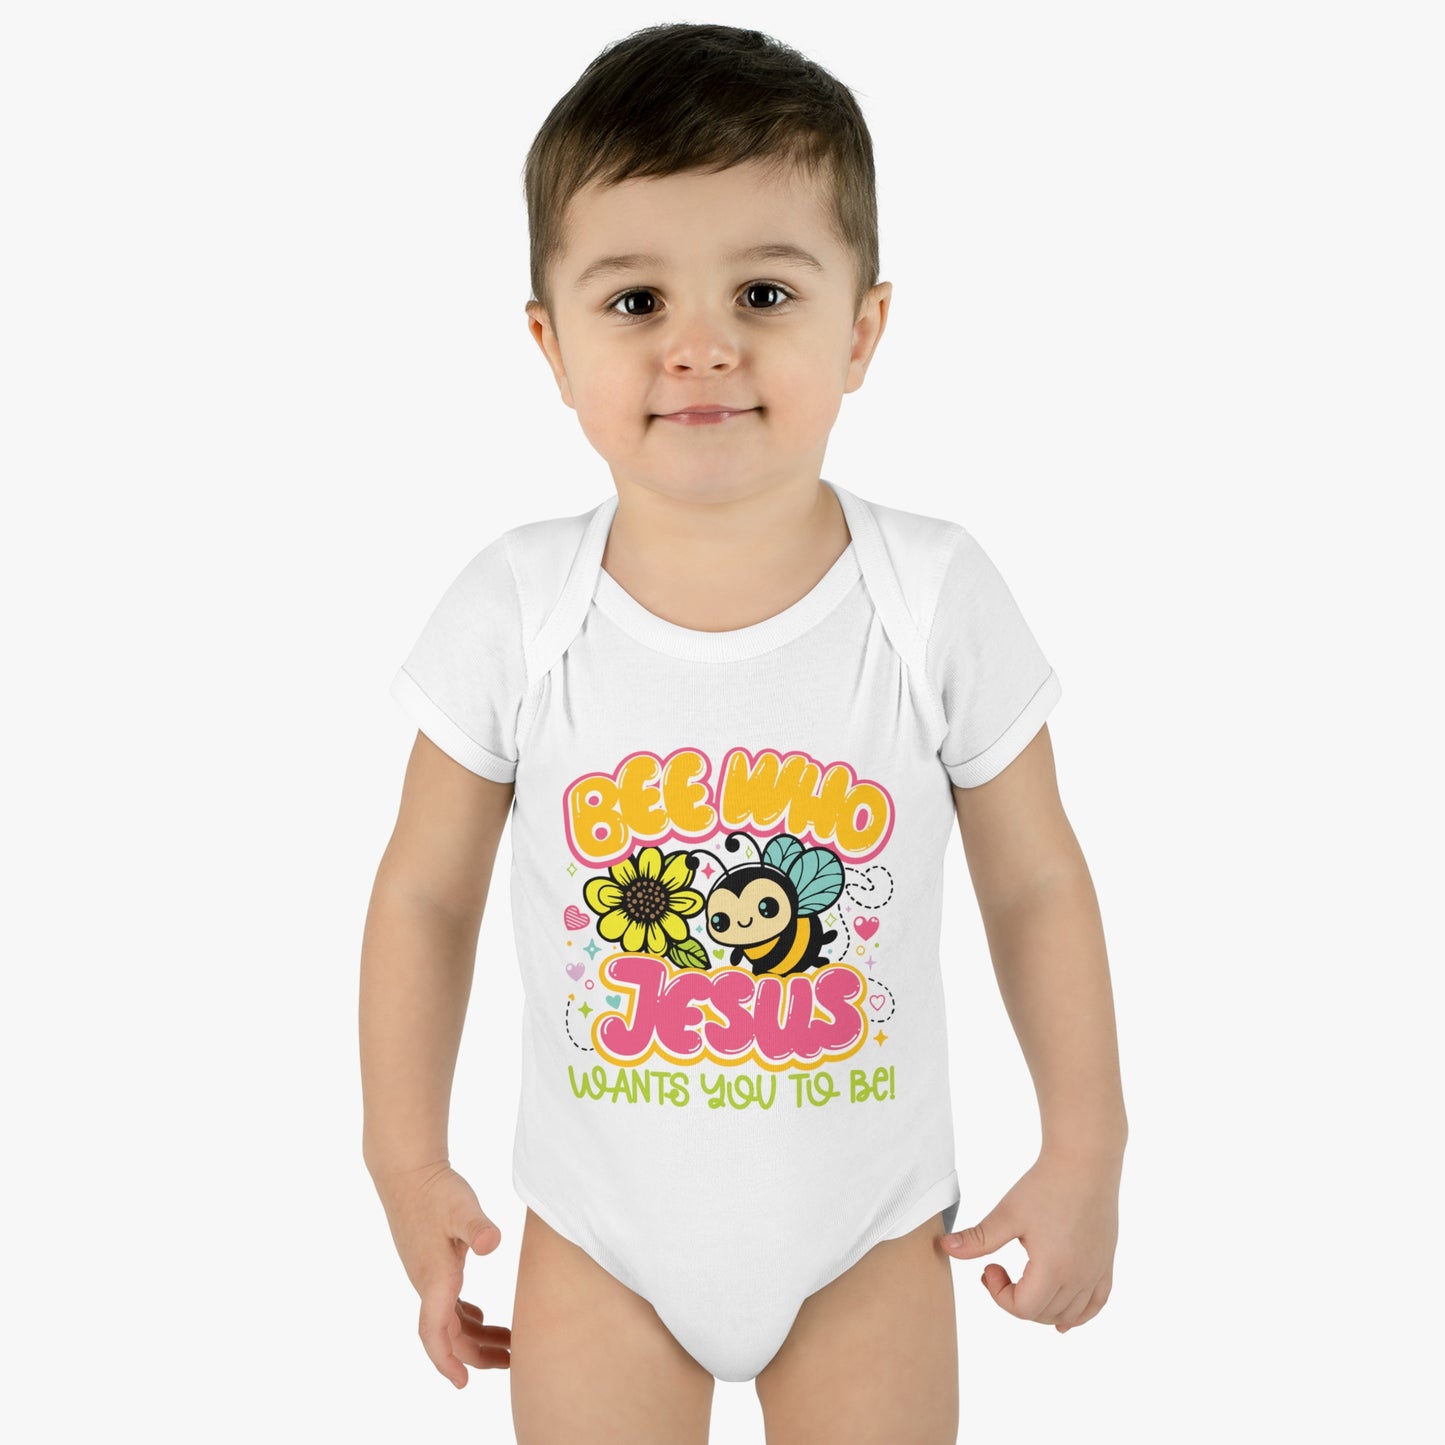 Bee Who Jesus Wants You To Be  Christian Baby Onesie